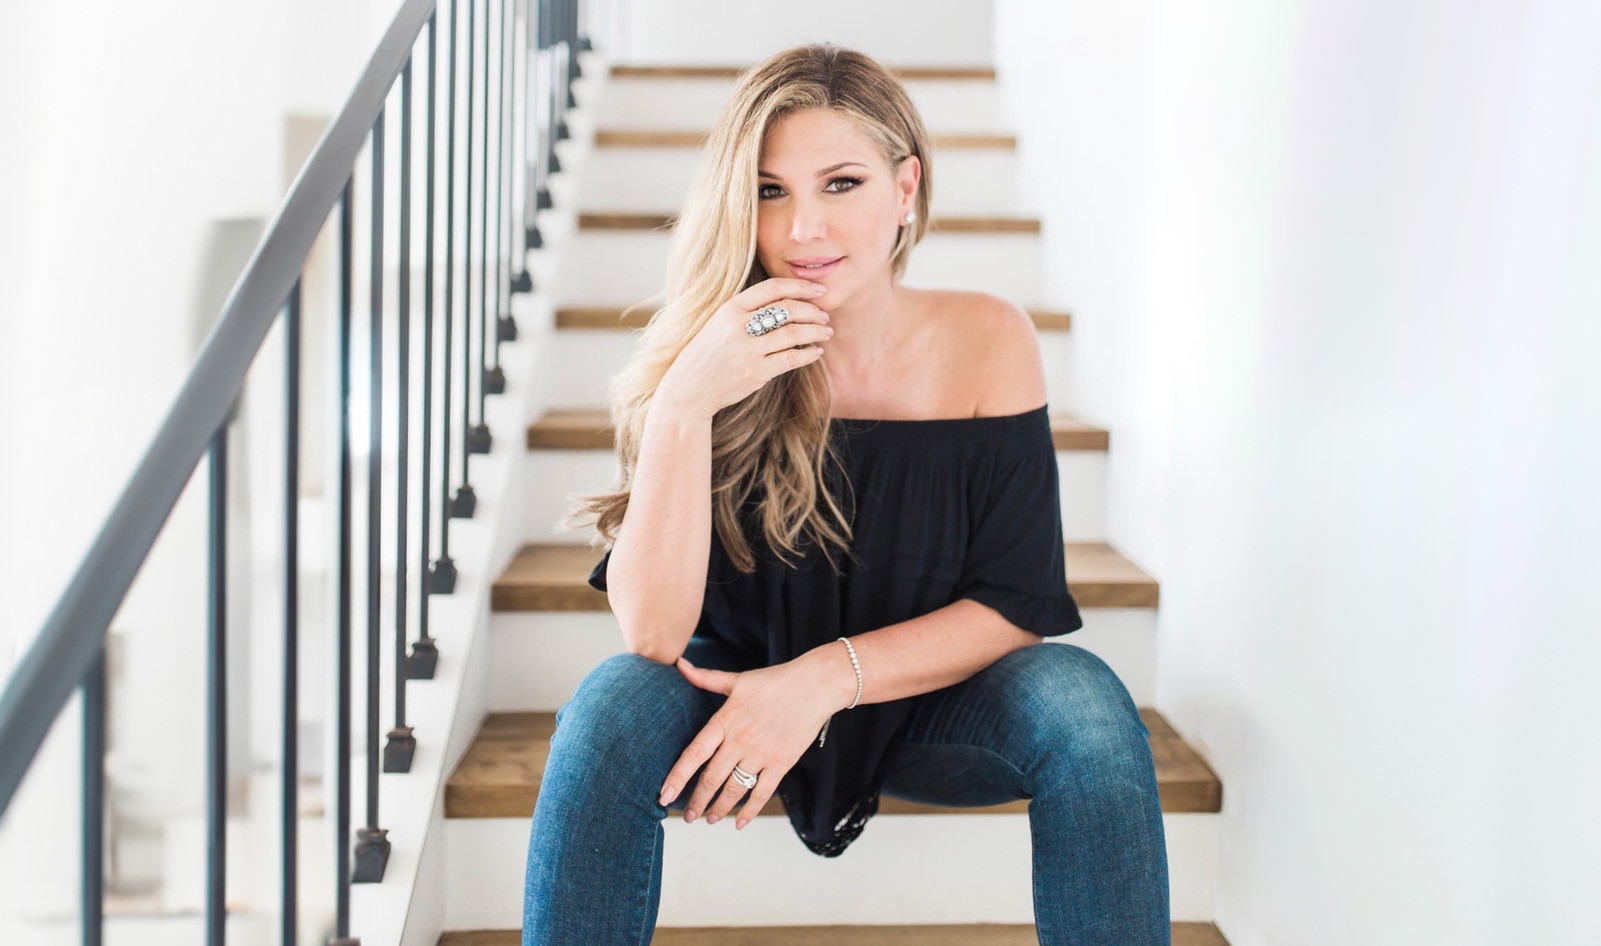 Daisy Fuentes Targets Multicultural Consumer